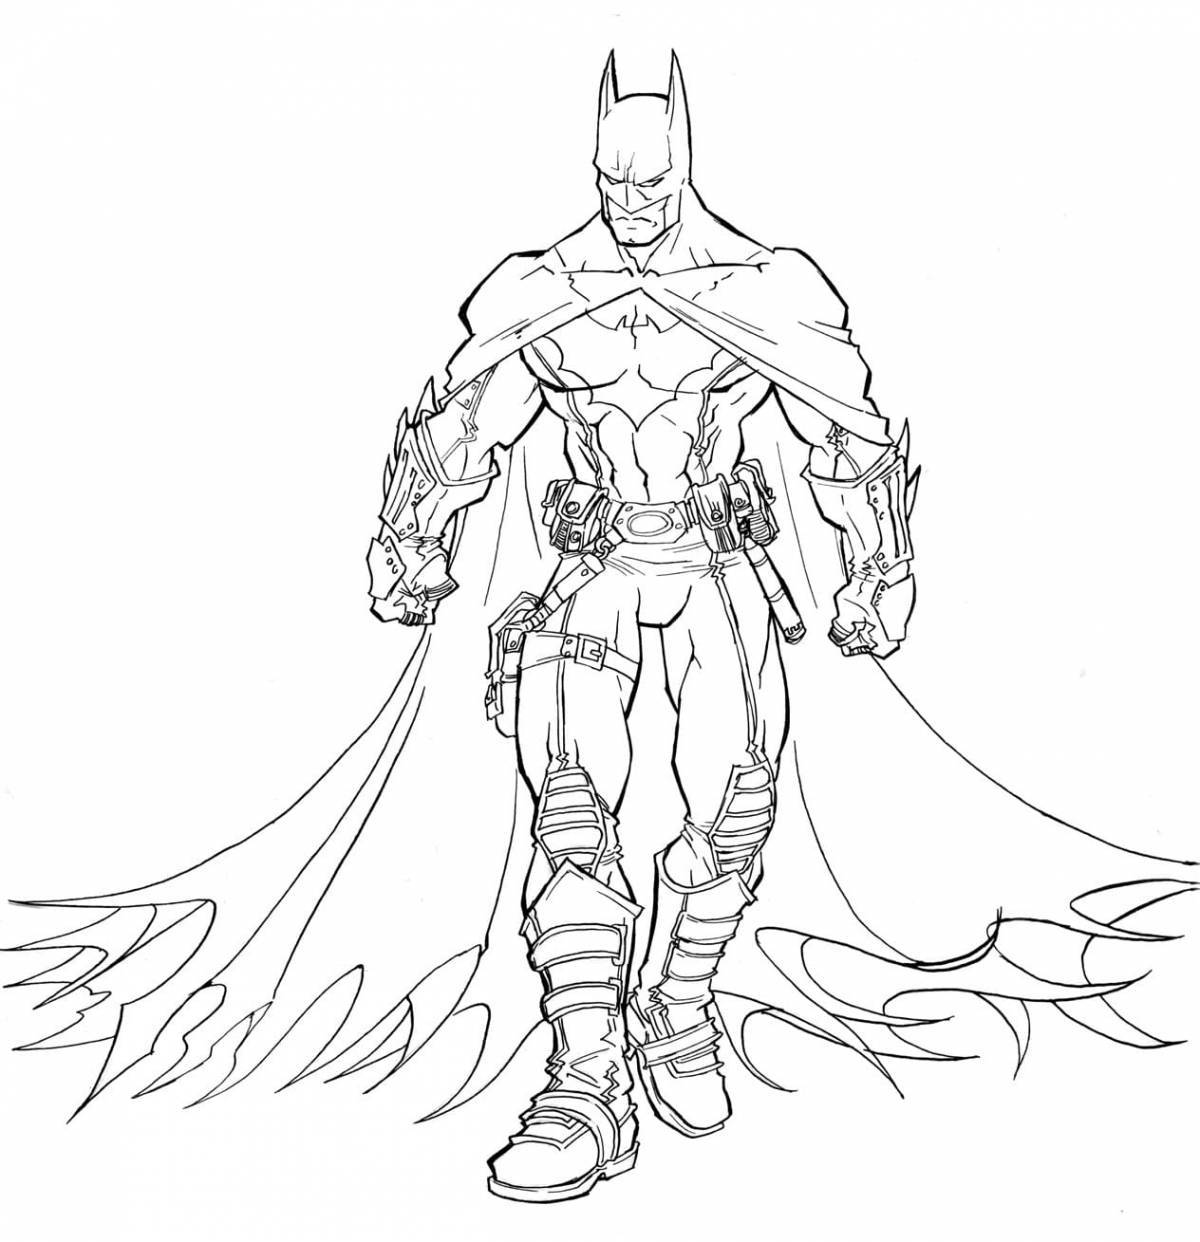 Powerful superhero coloring pages for boys